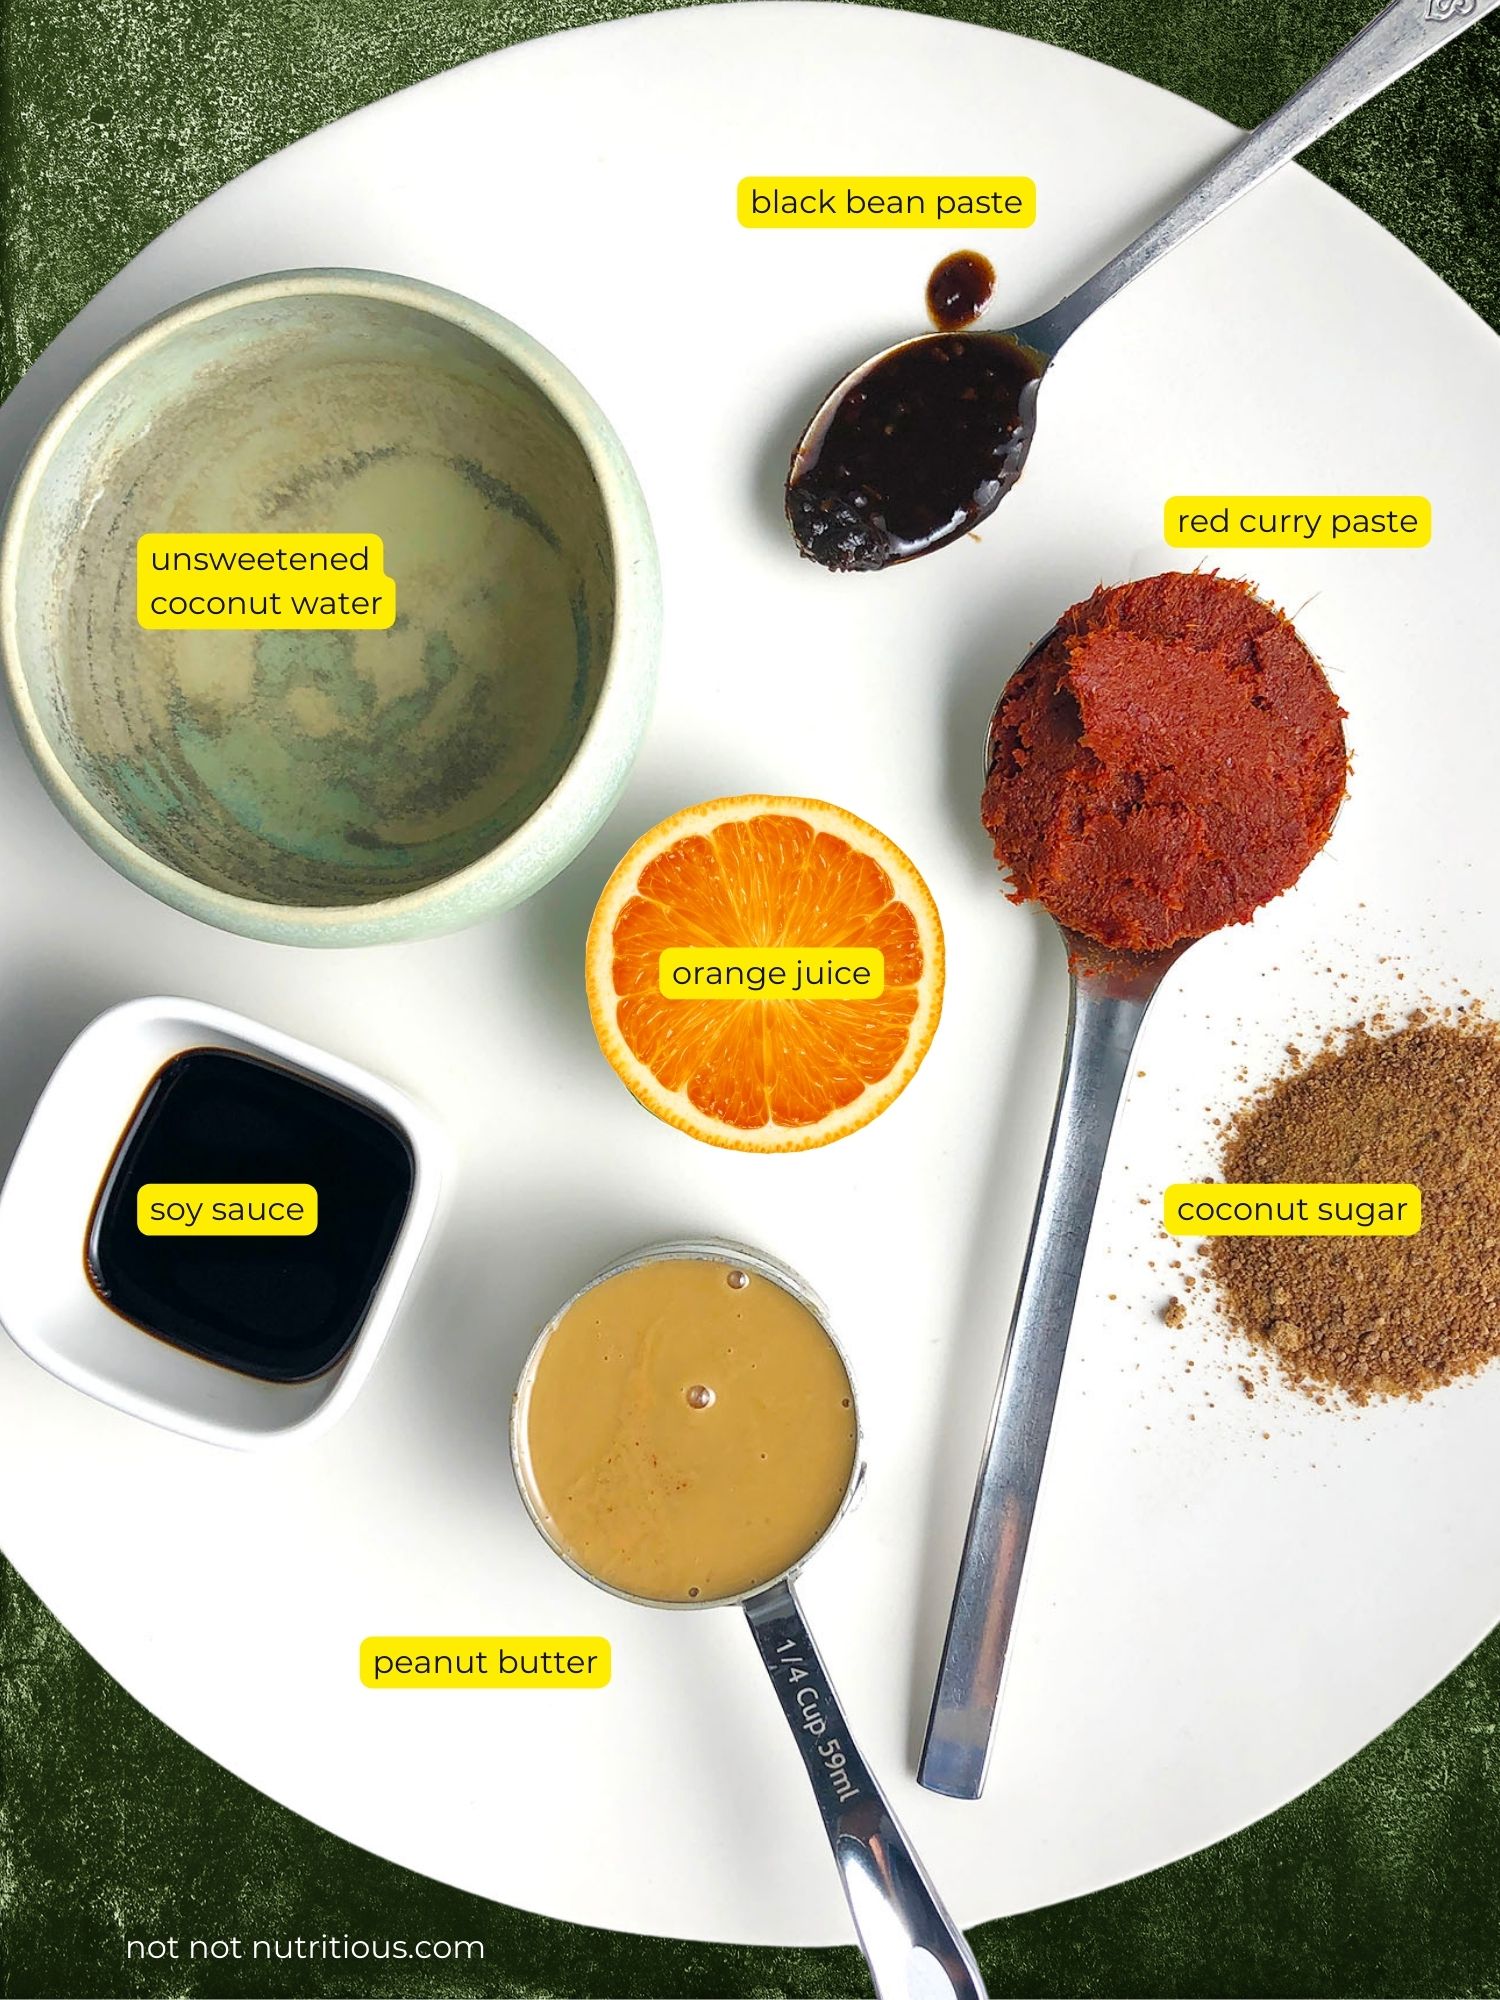 Top-down view of ingredient for Spicy Thai-inspired Peanut Sauce, including unsweetened coconut water, black bean sauce, red curry paste, coconut sugar, natural peanut butter, orange juice, and soy sauce